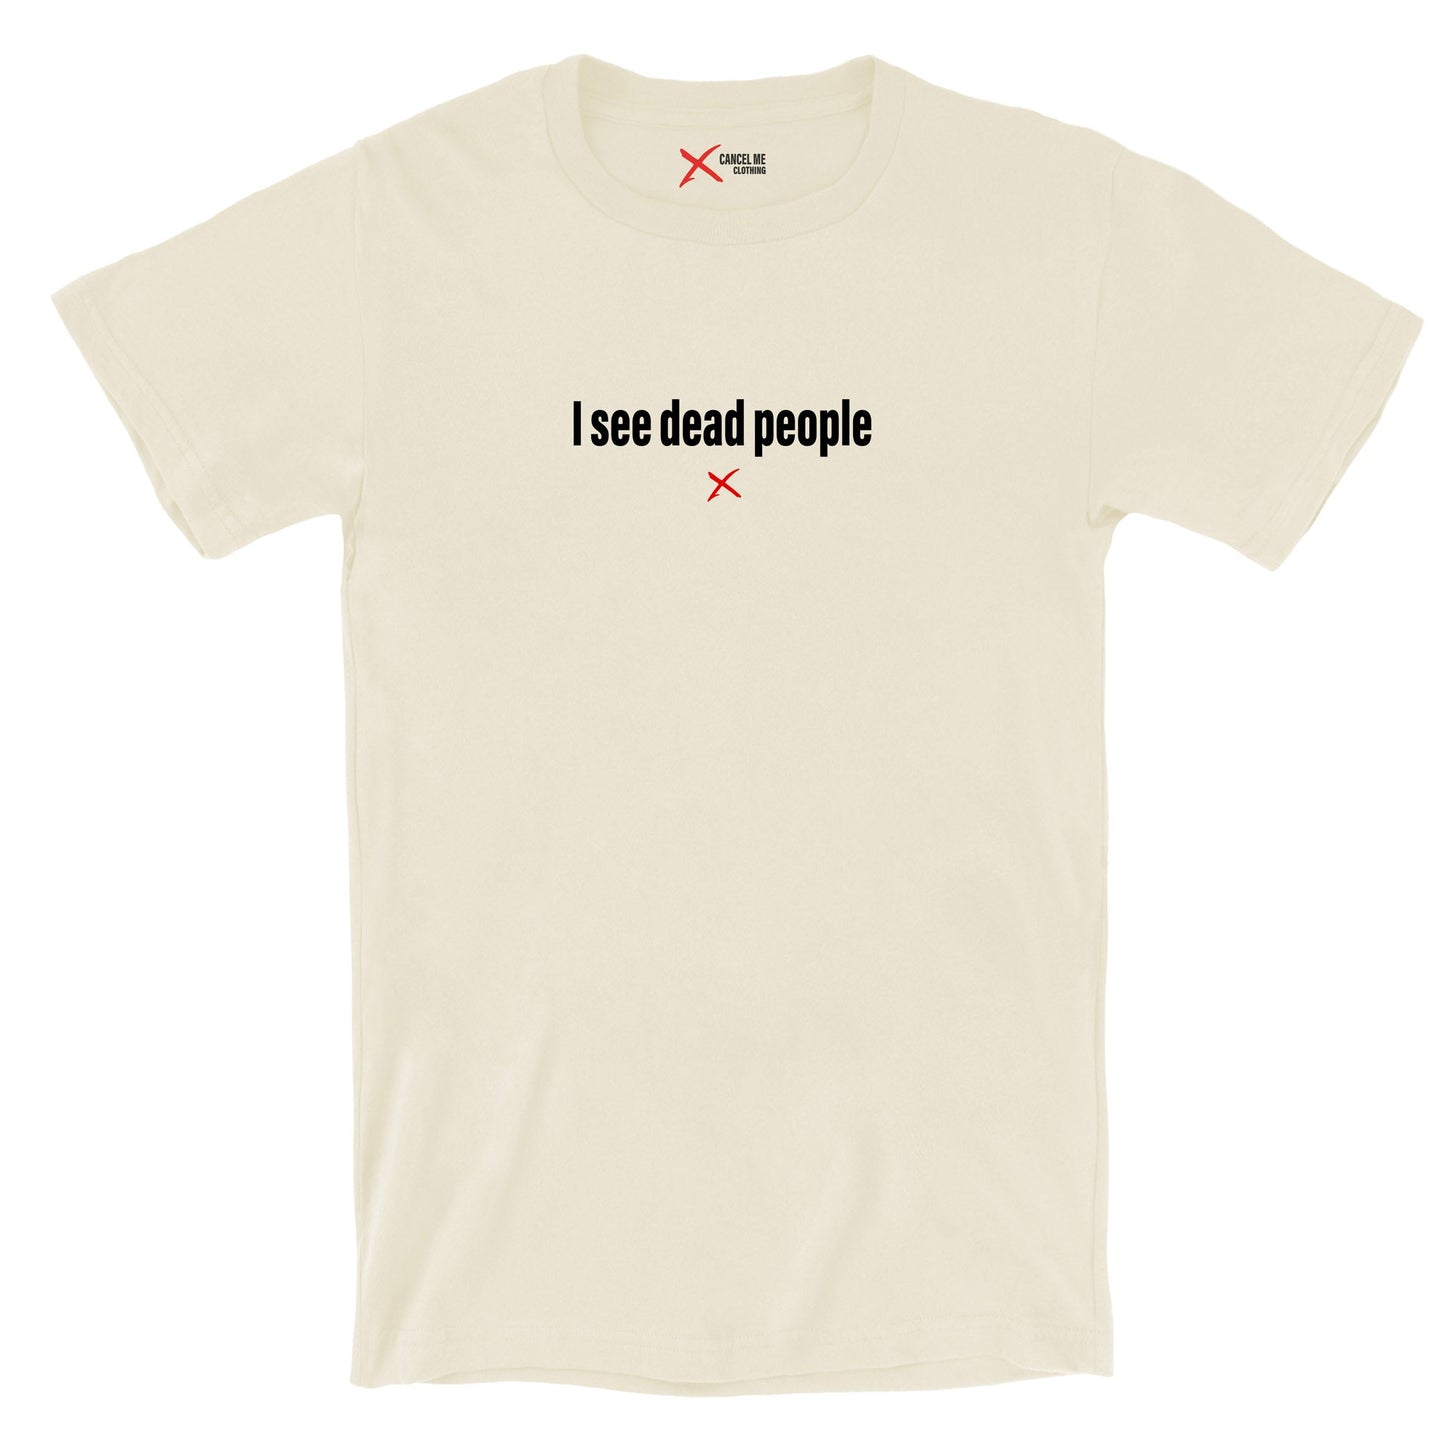 I see dead people - Shirt